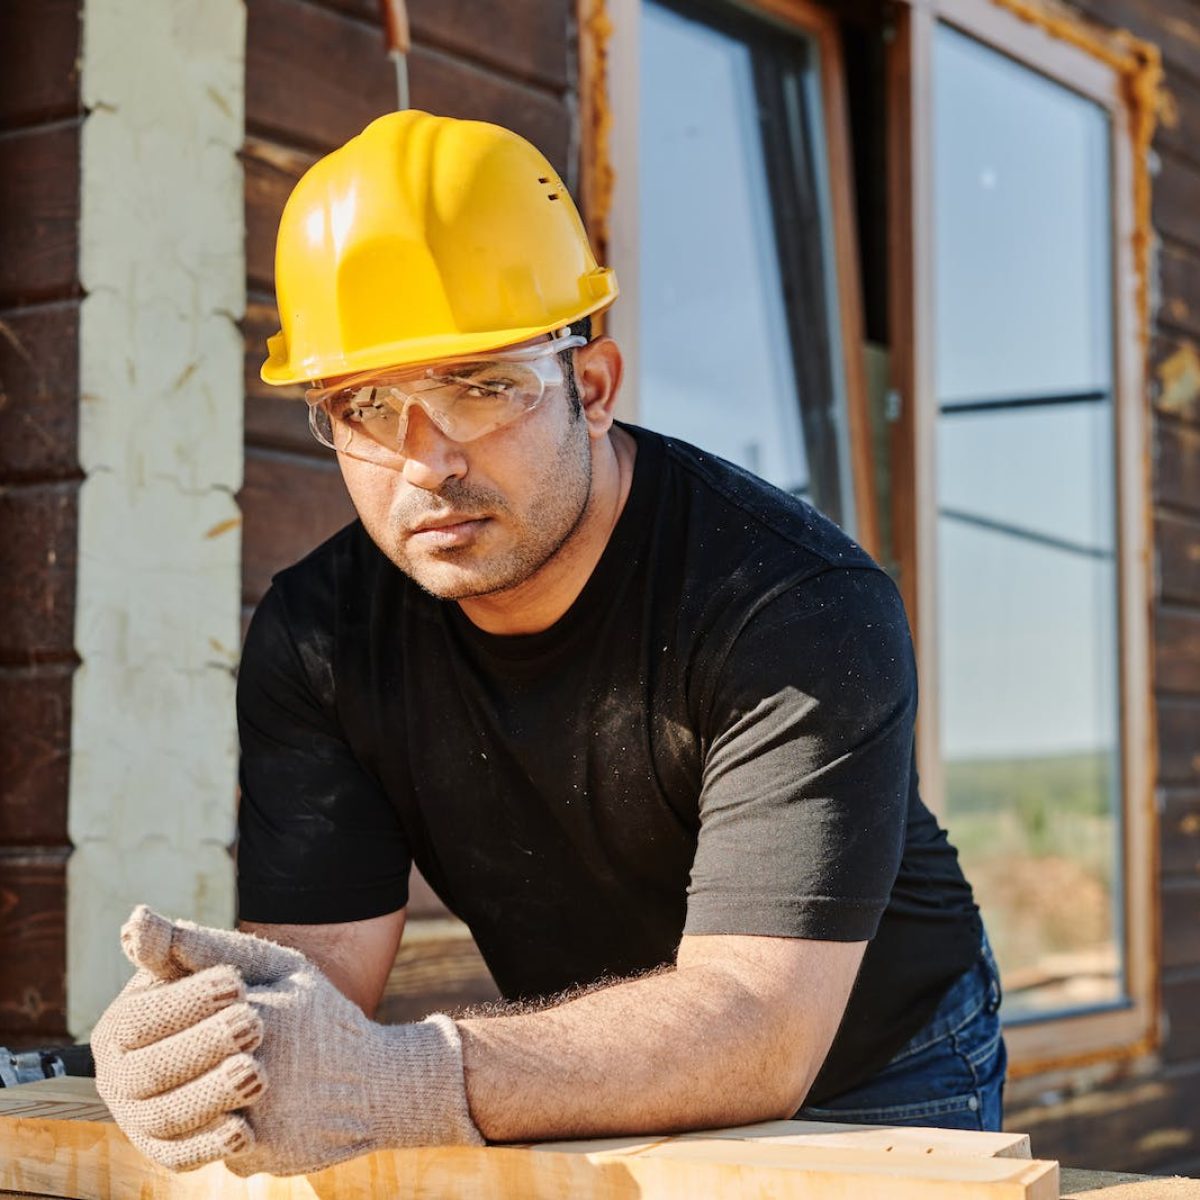 Man in Black Crew Neck T-shirt Wearing Yellow Hard Hat While Standing by the Wooden Table